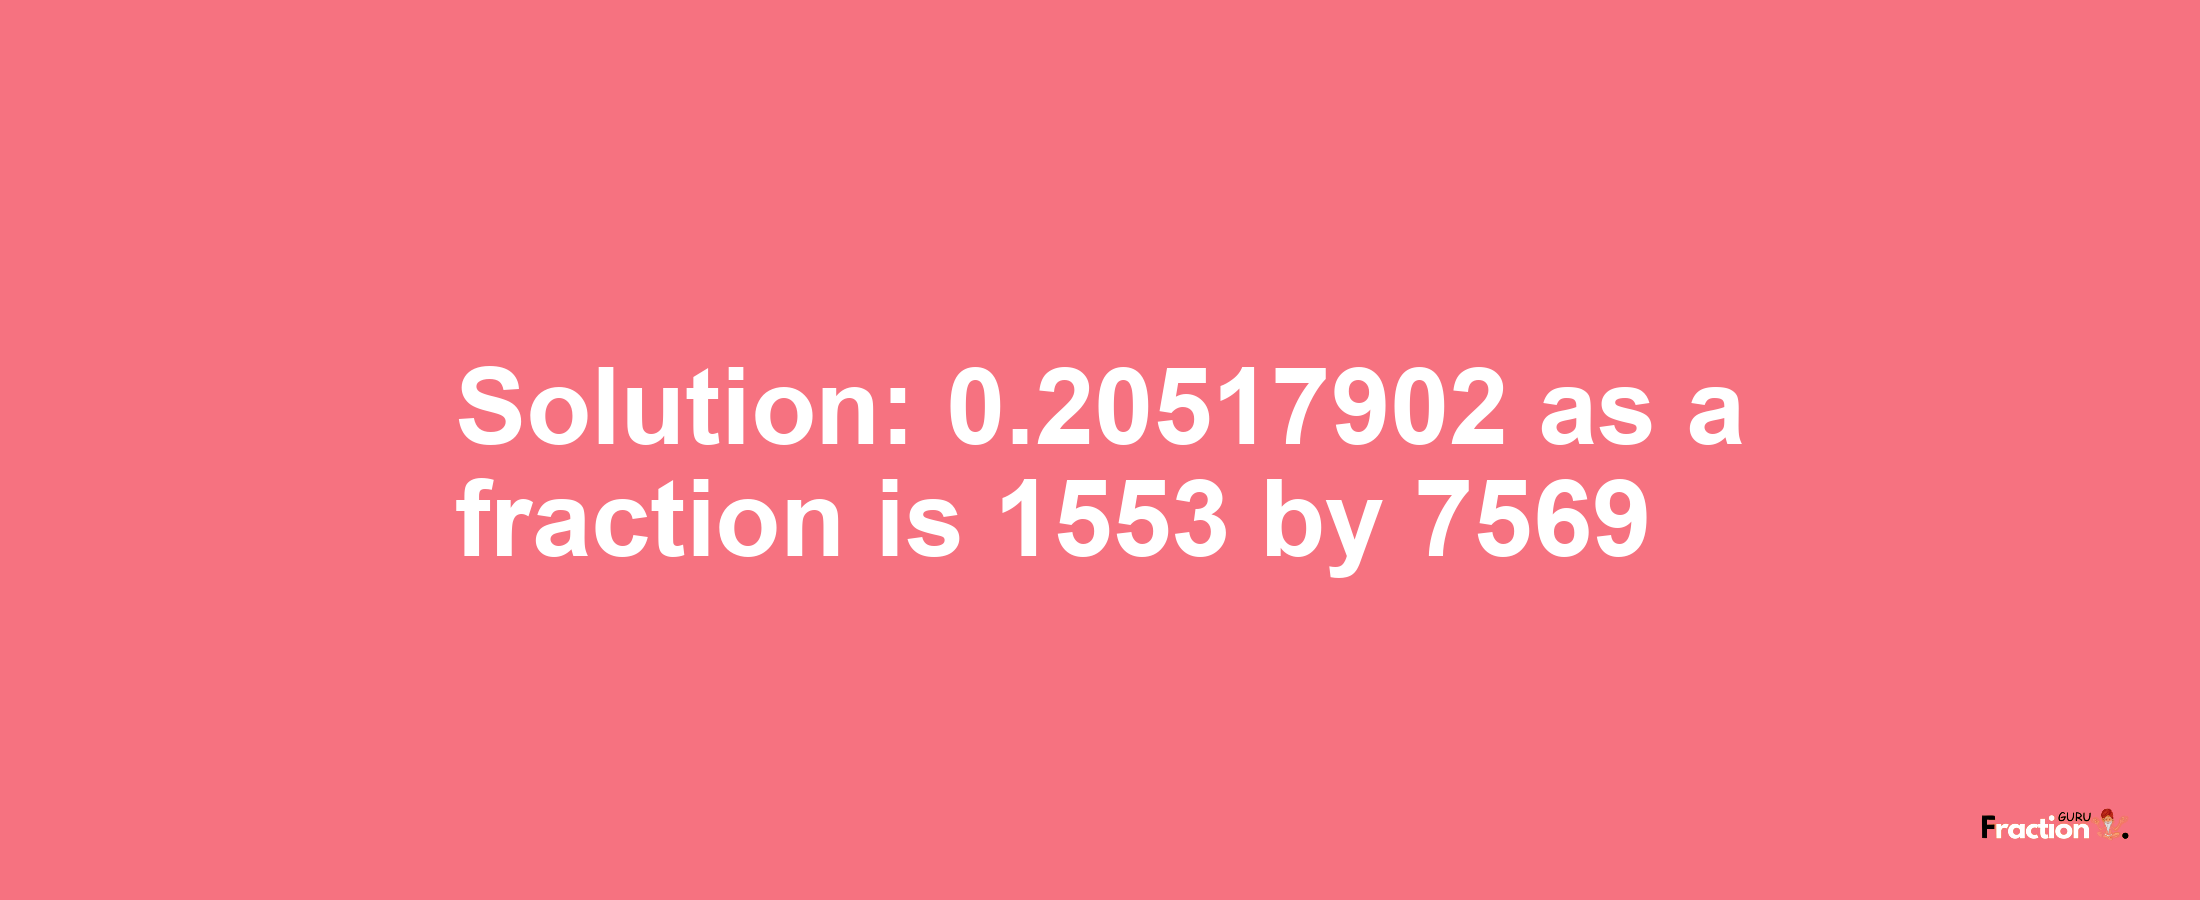 Solution:0.20517902 as a fraction is 1553/7569